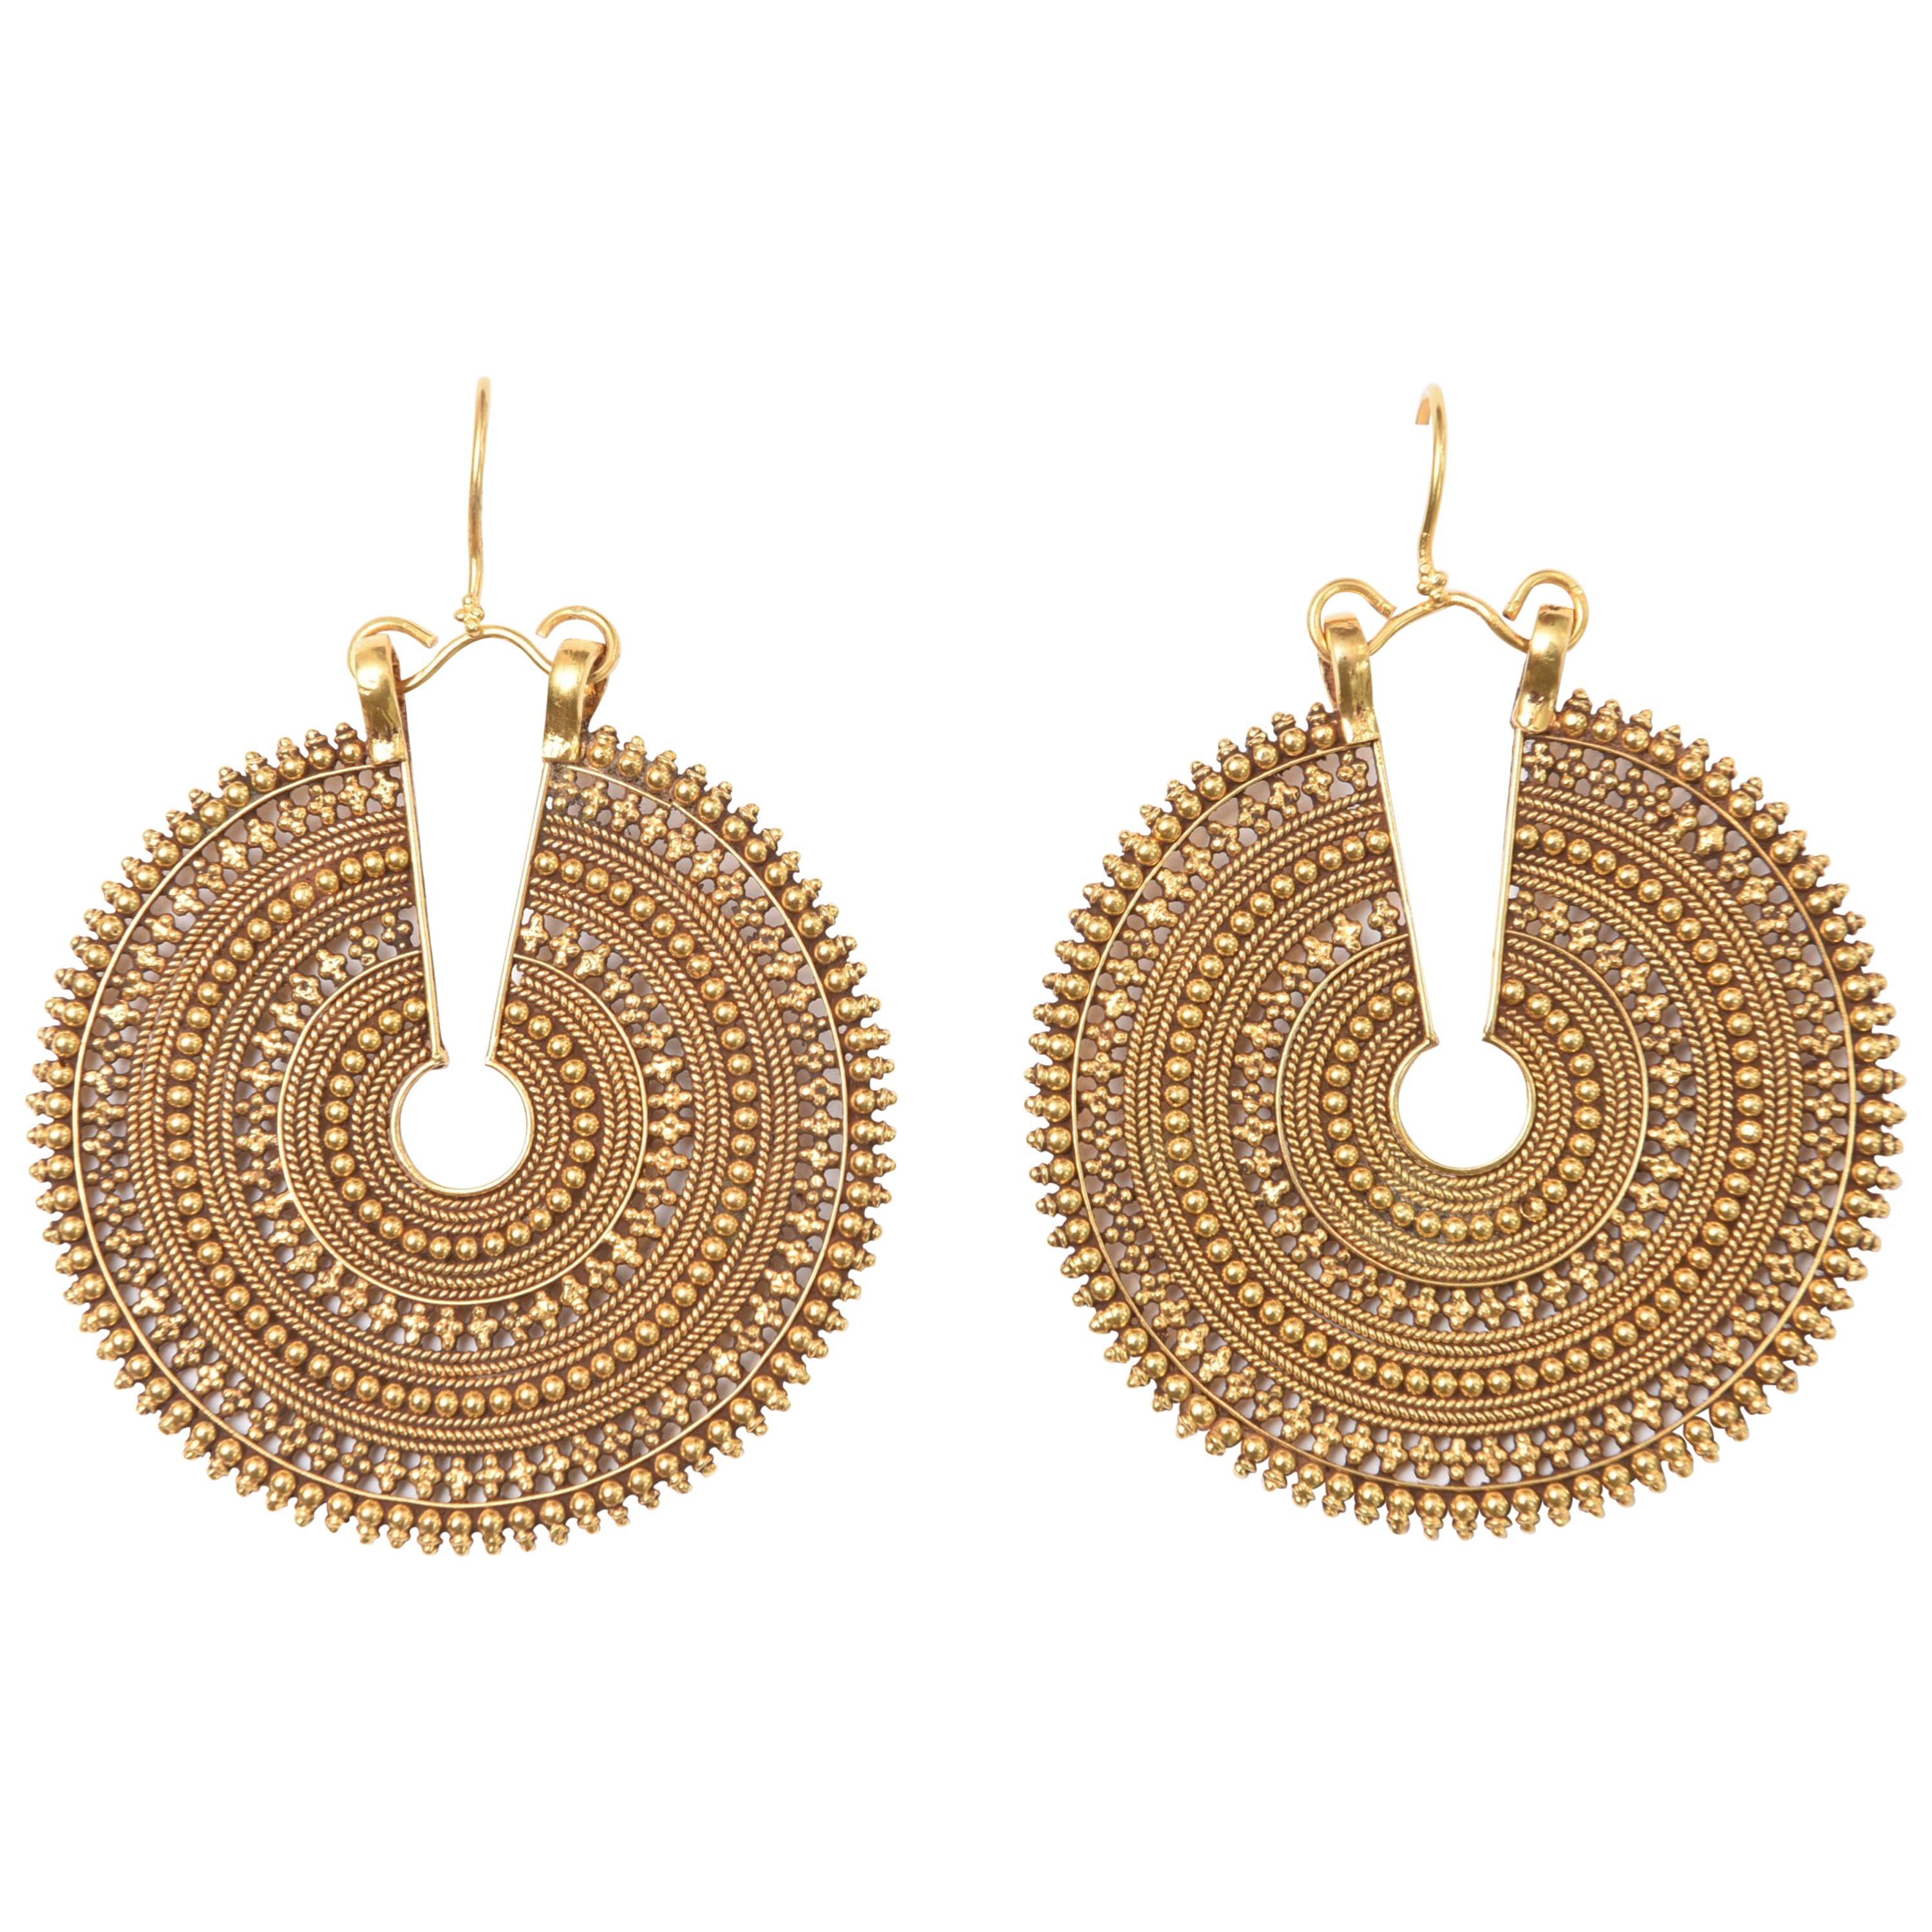 Rare and Extraordinary Gold Earrings